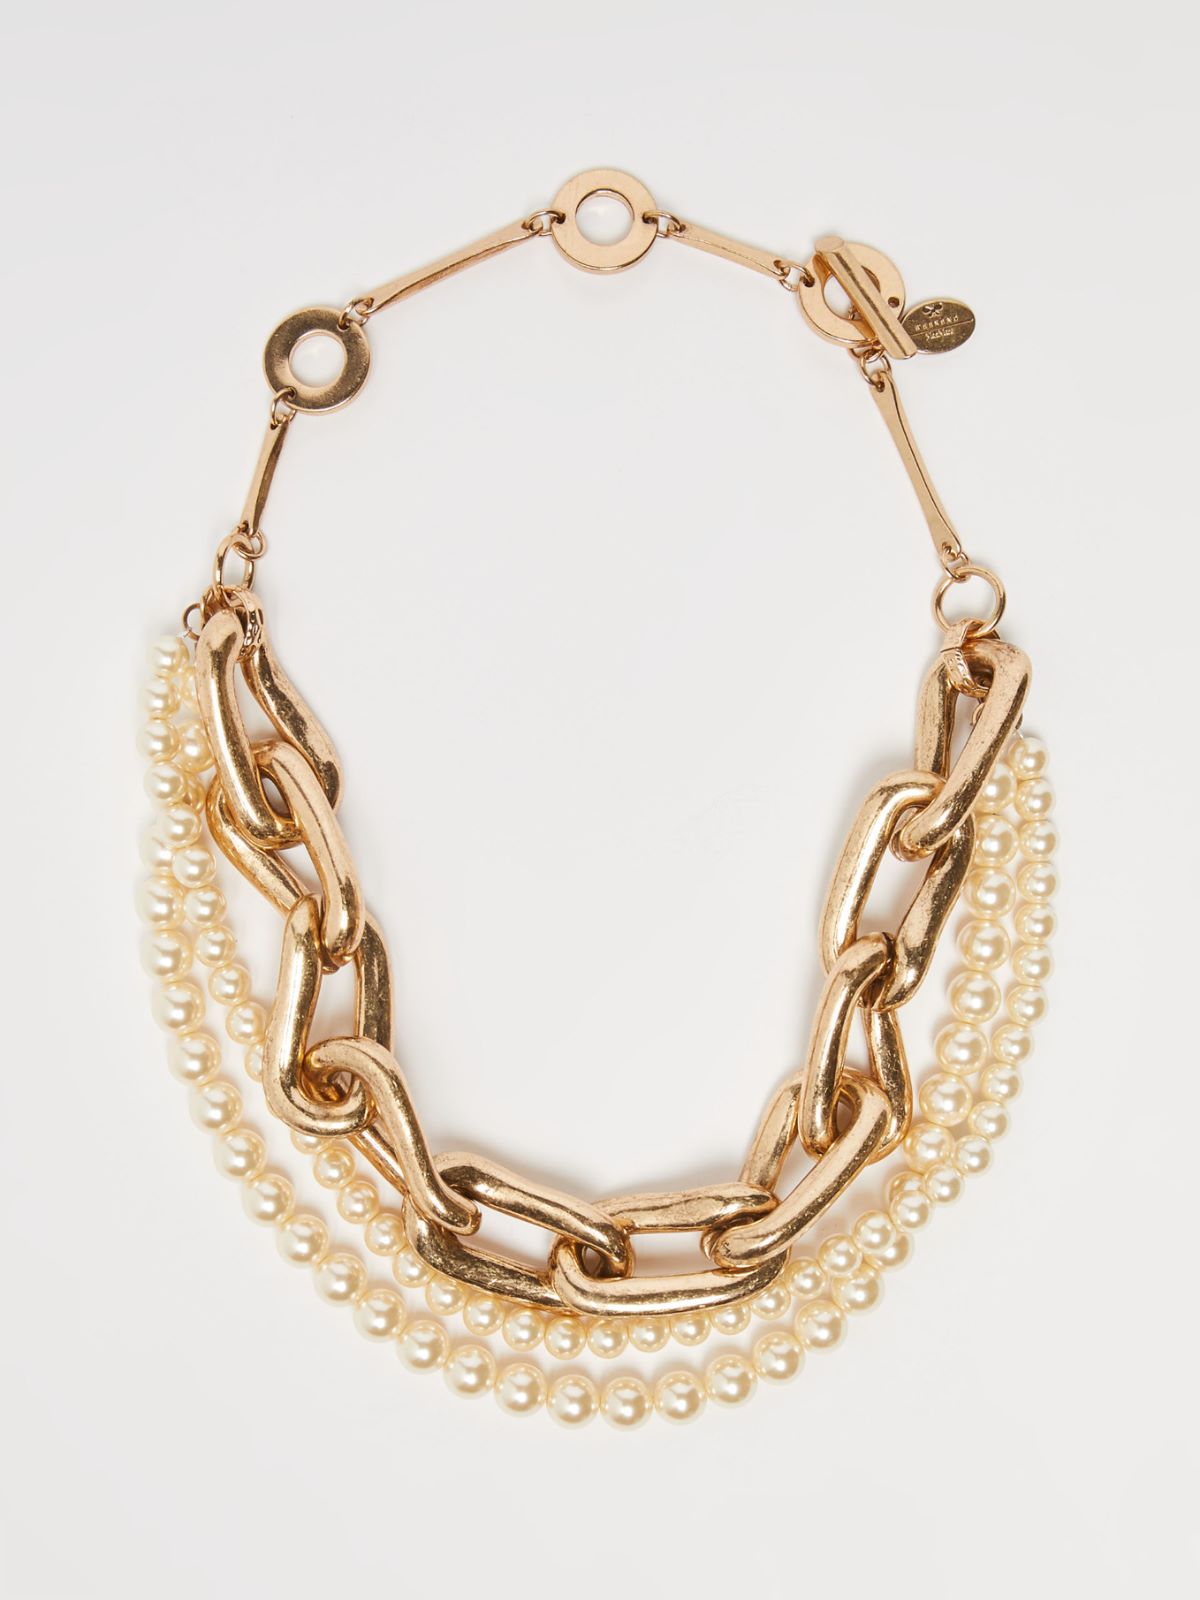 Metal and resin necklace - GOLD - Weekend Max Mara